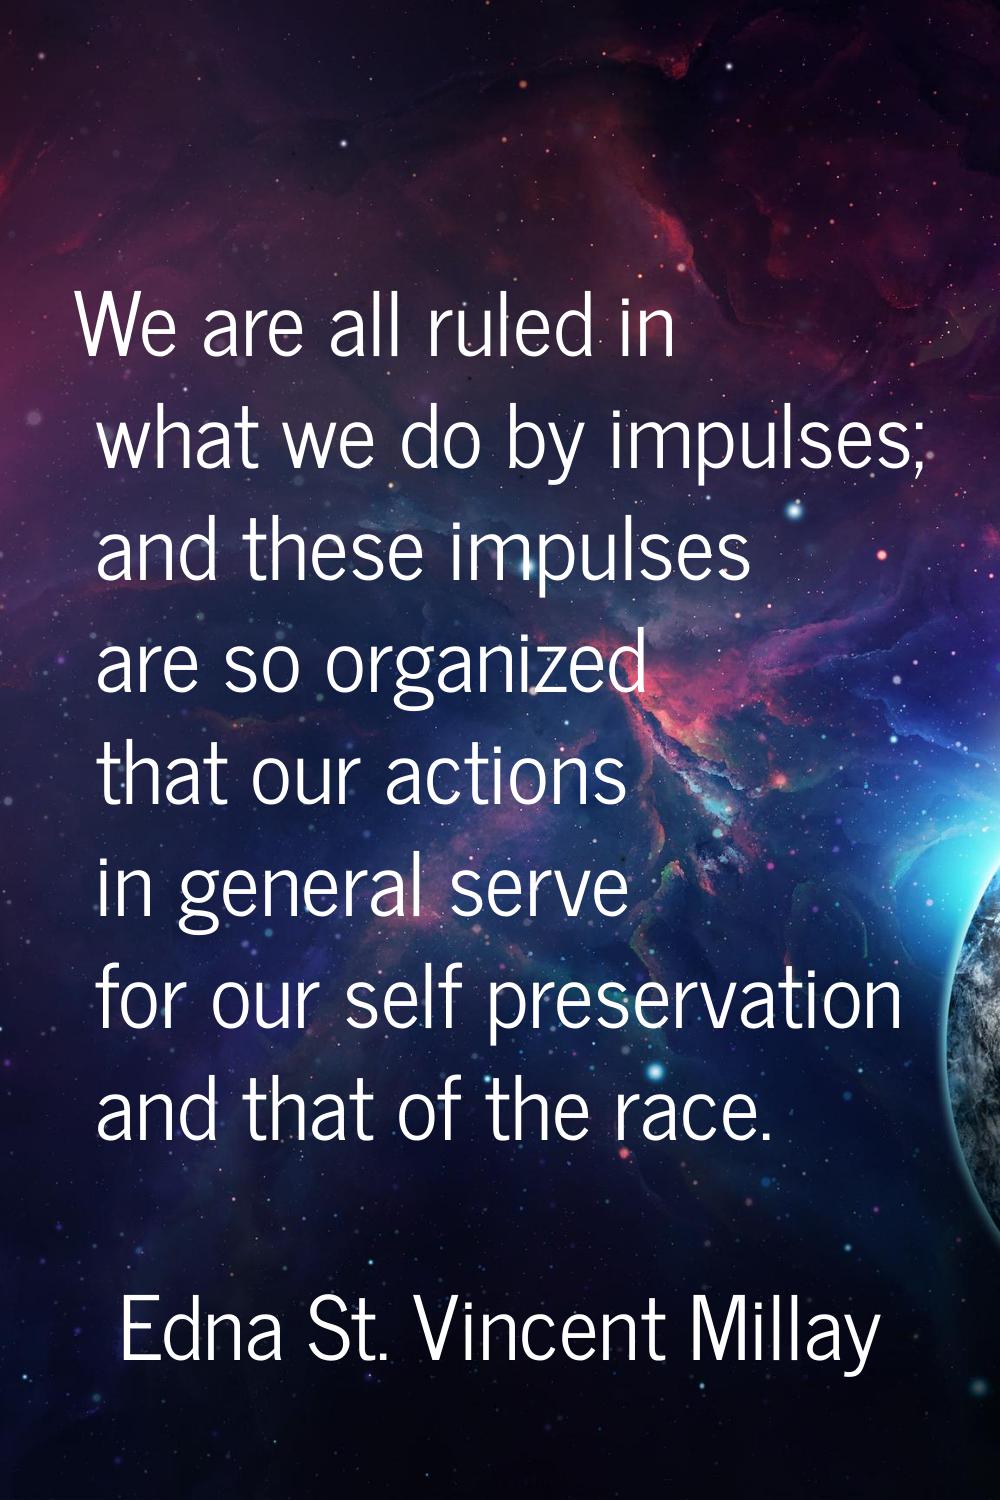 We are all ruled in what we do by impulses; and these impulses are so organized that our actions in